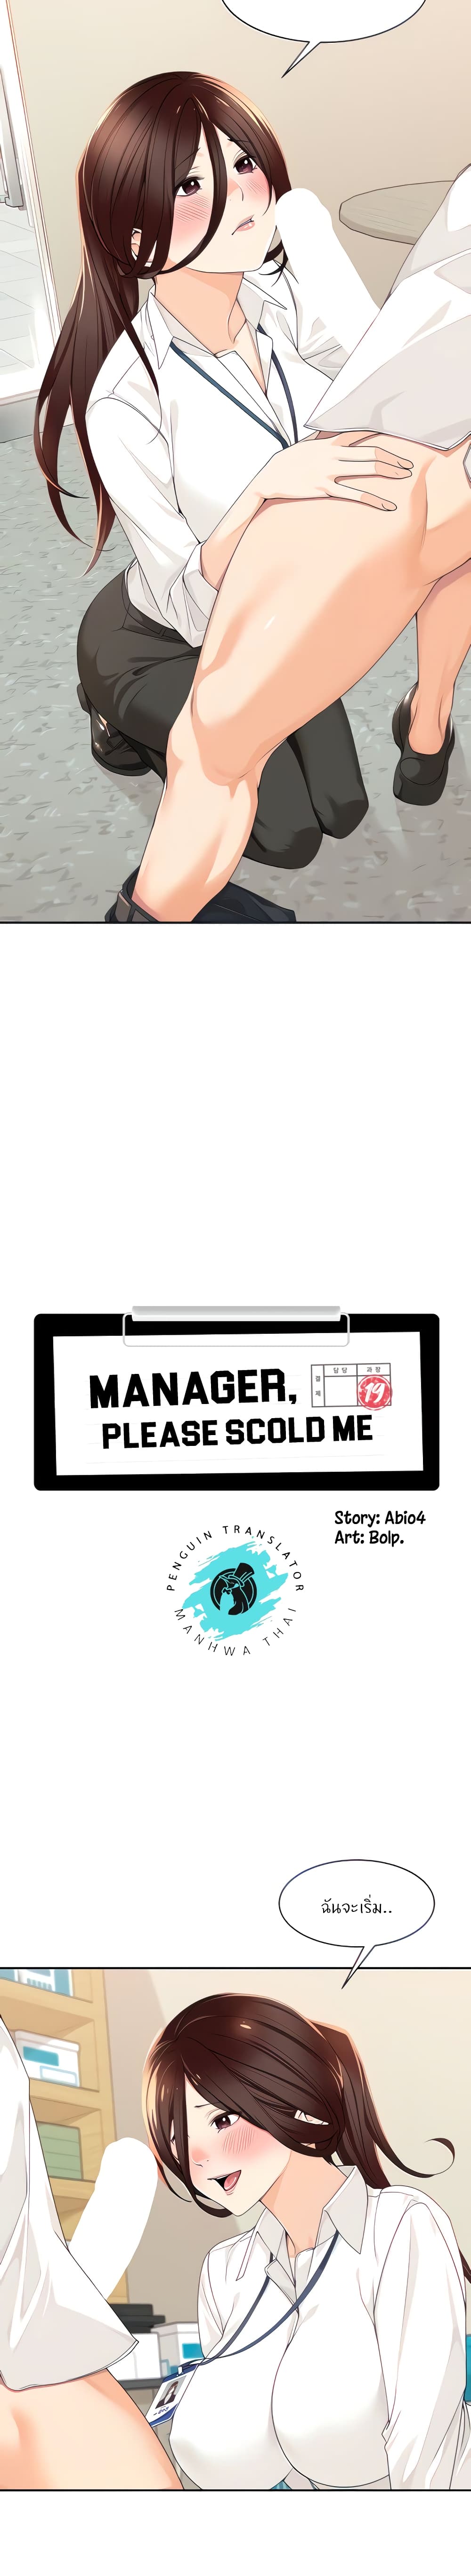 Manager, Please Scold Me 6 03